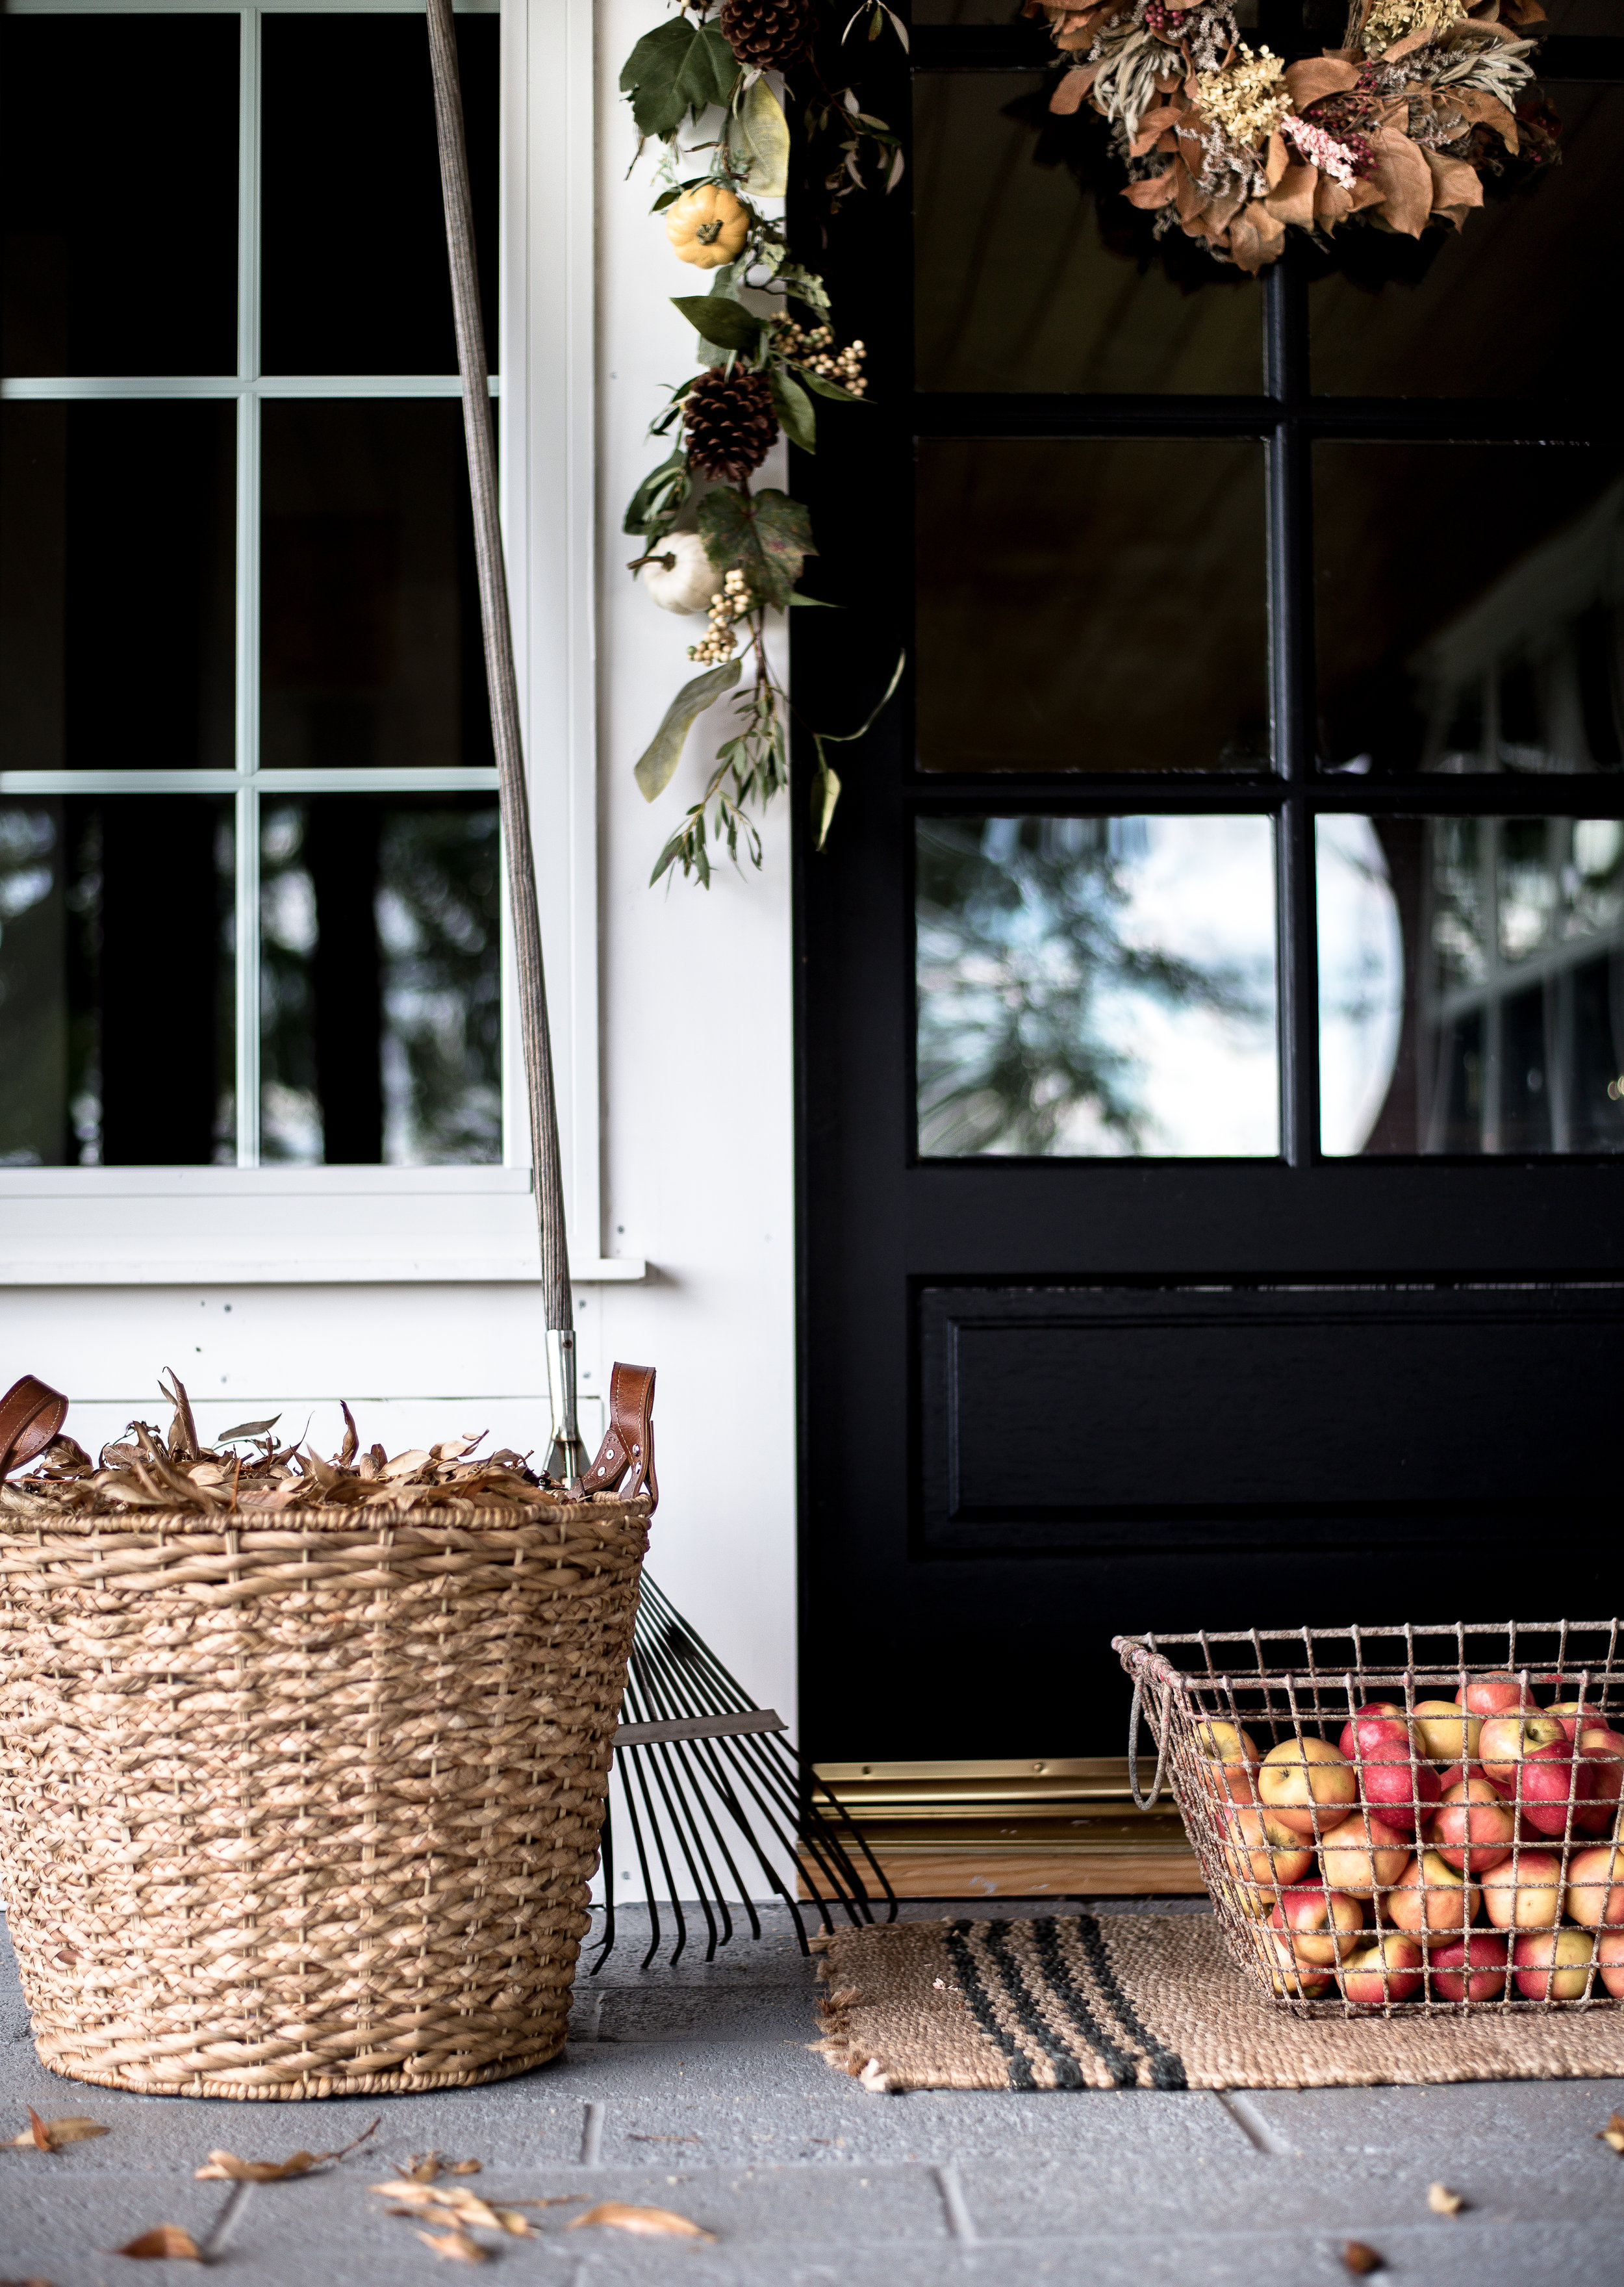 A few simple fall decorating ideas for your front porch from five different bloggers! #fallporch #falldecorating #falldecor #frontporchdecorations